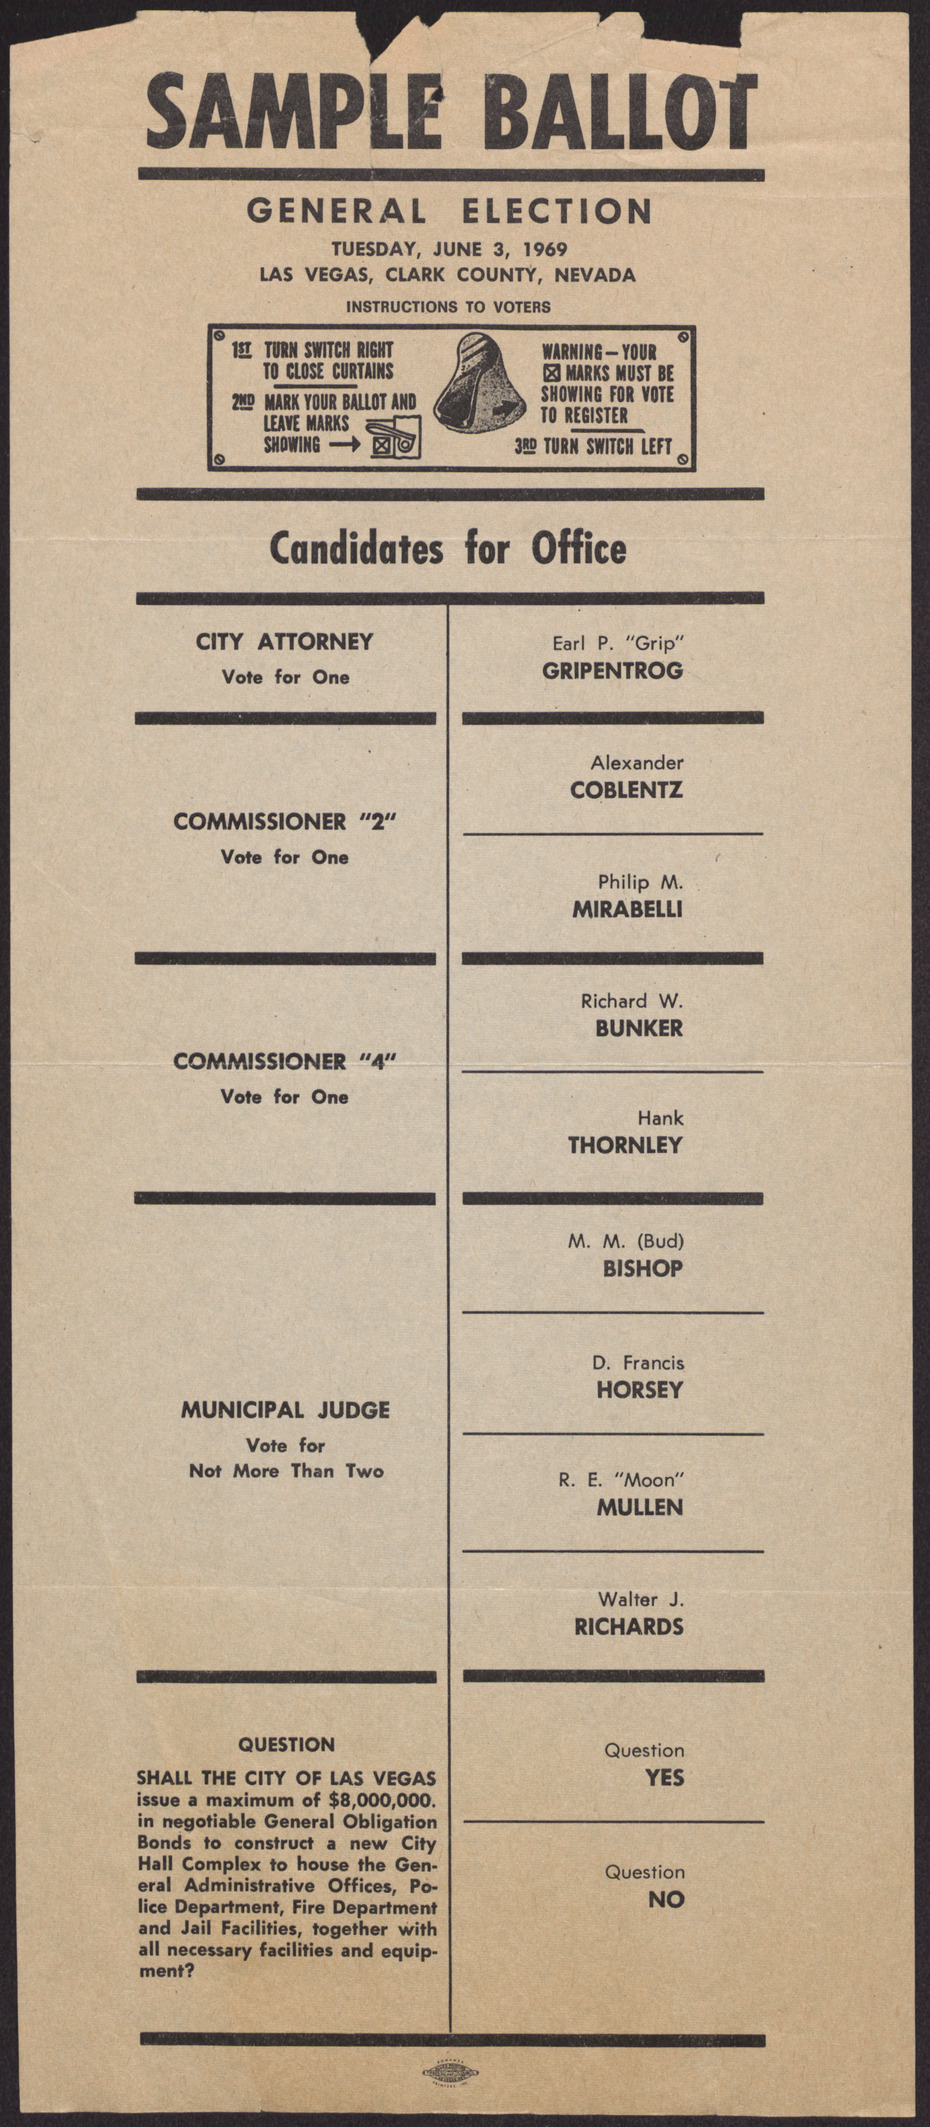 Sample ballot for general election being held June, 3, 1969